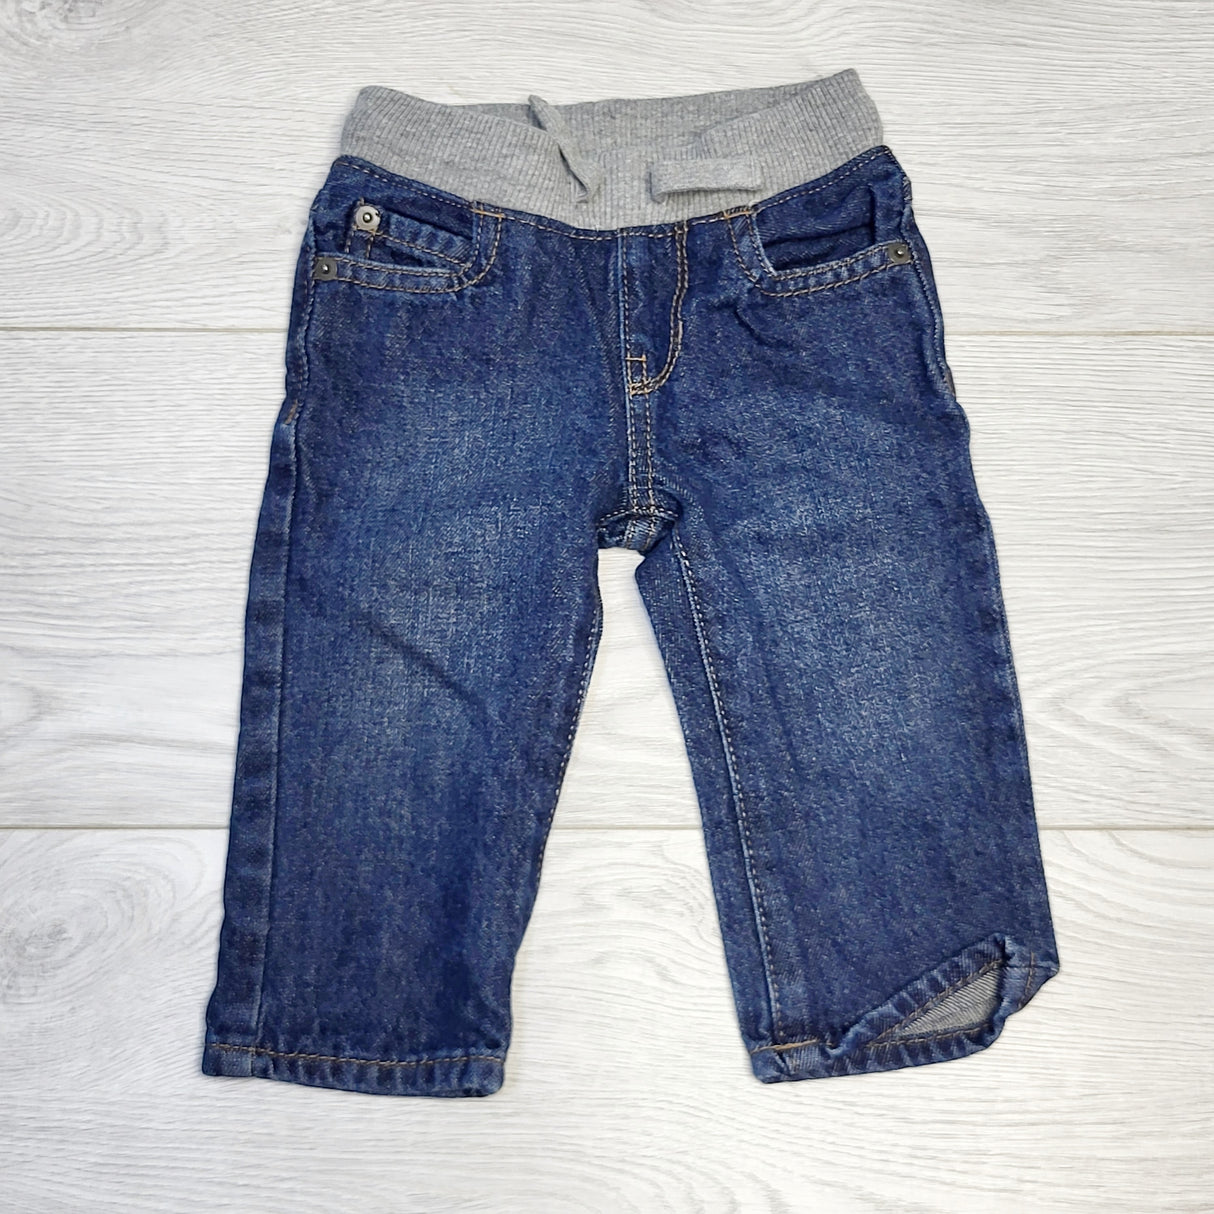 CHOL2 - Children's Place jeans with cotton waistband, 6-9 months